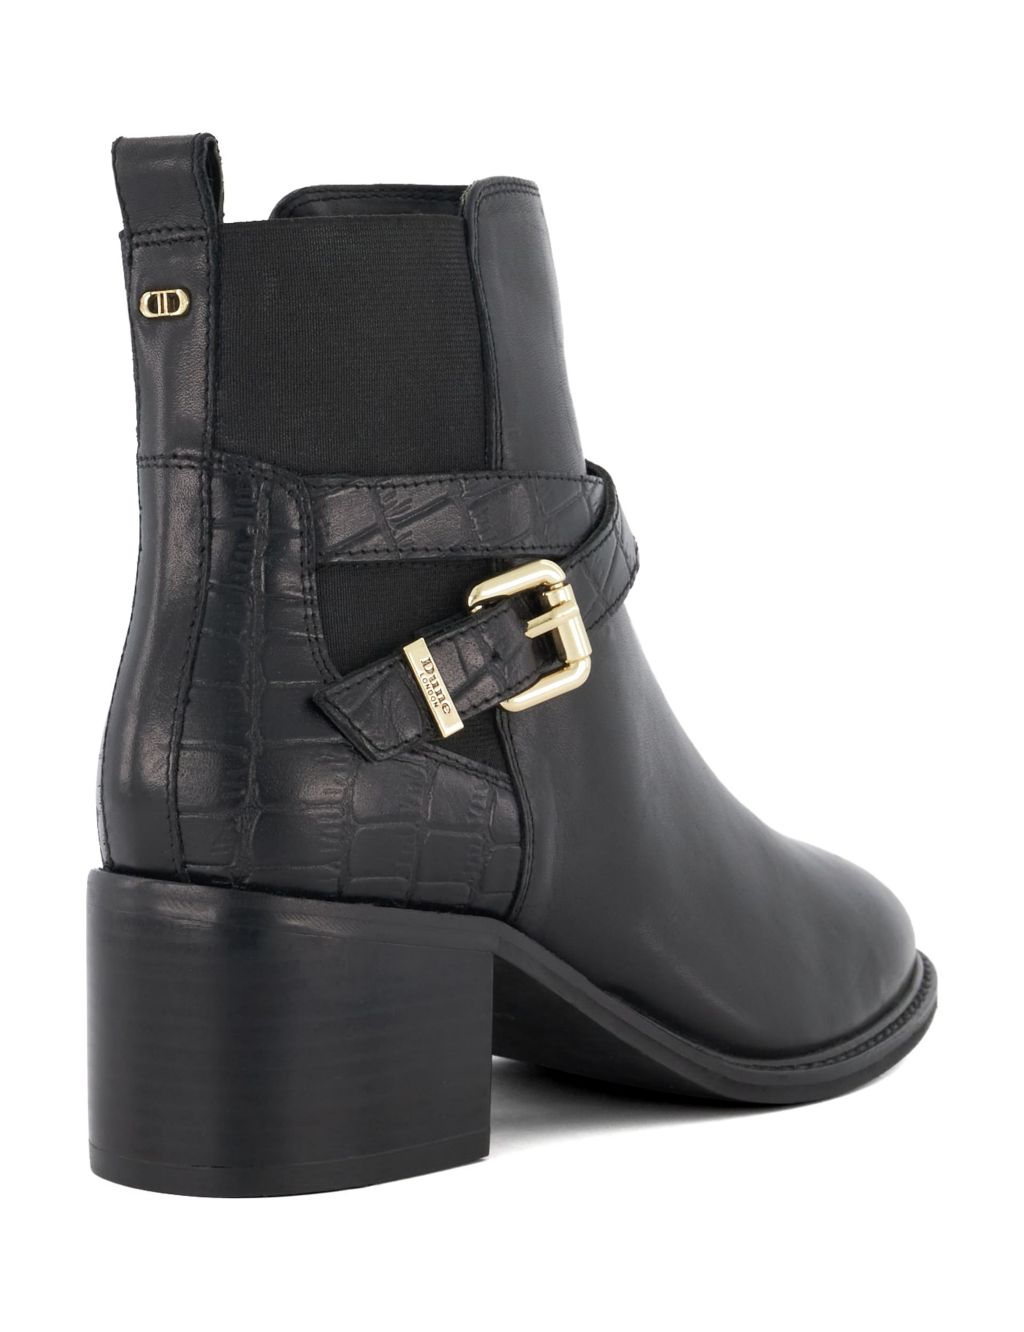 Leather Buckle Block Heel Ankle Boots 2 of 4